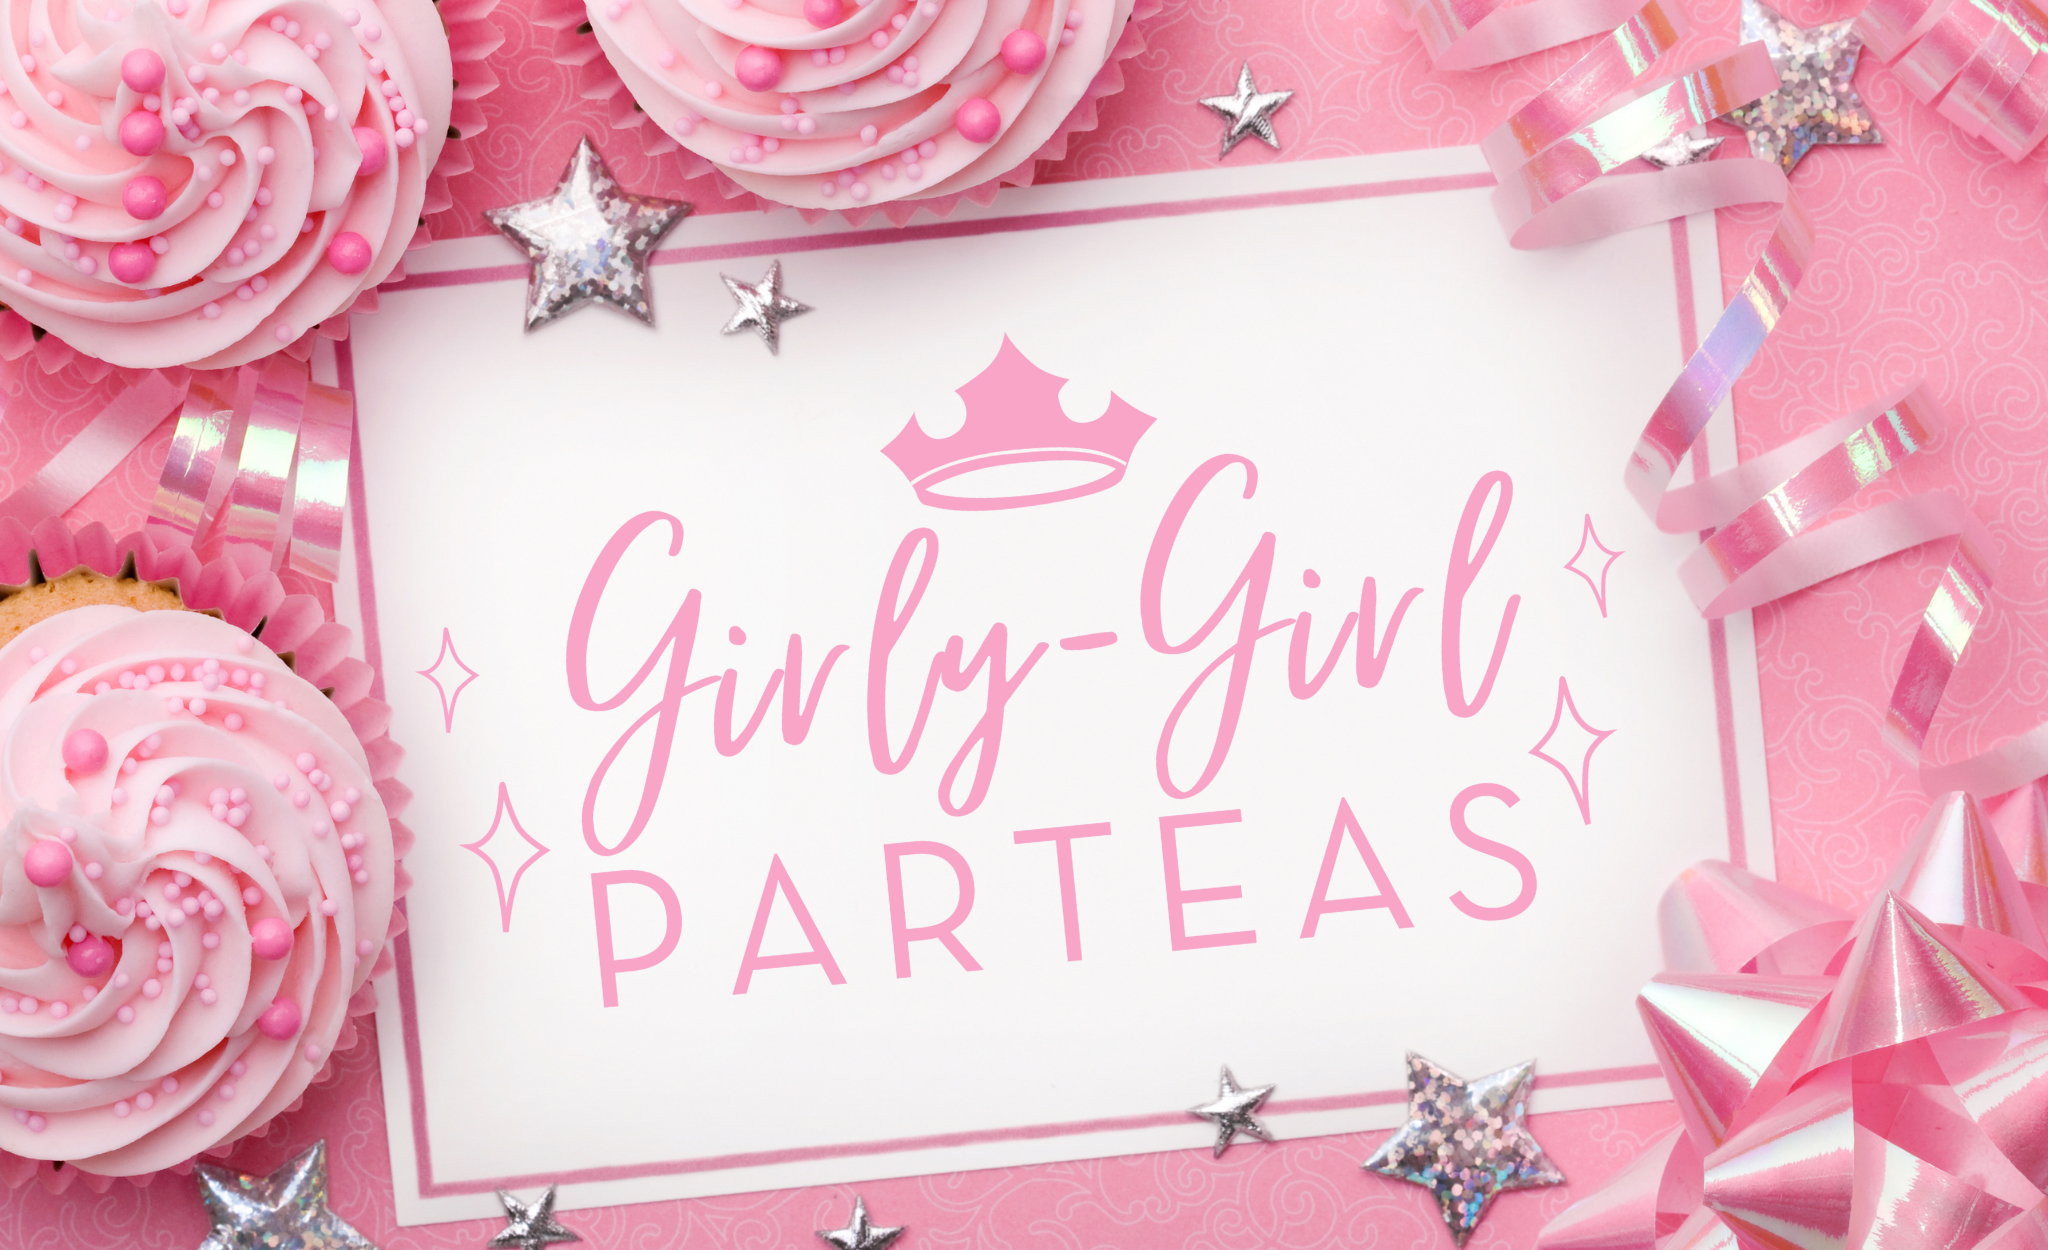 Girly-Girl Partea’s Princess Party Planner & Character Entertainers